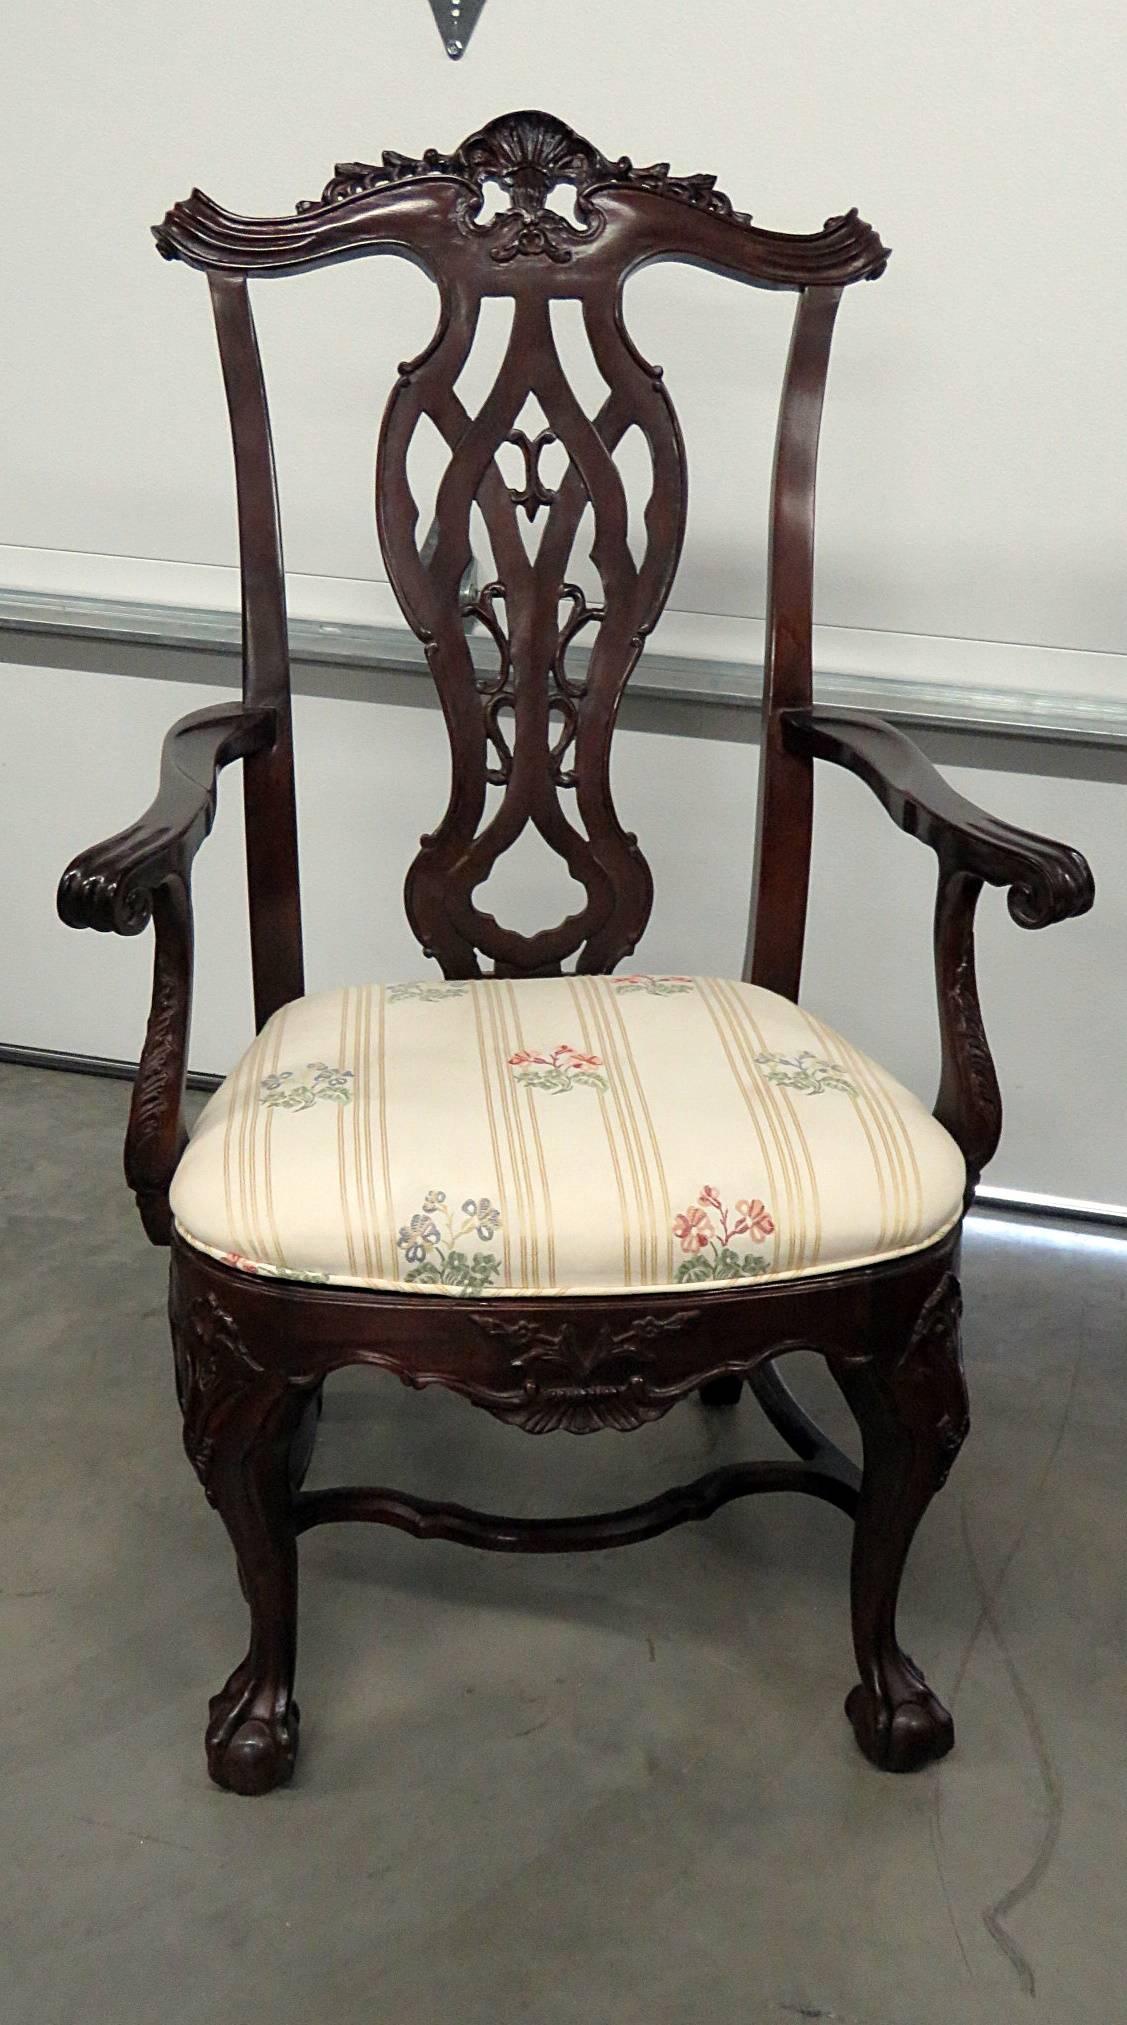 Pair of Heritage, Biltmore Estate collection, Georgian style armchairs. Carved wood with ball and claw feet. Measures: 20